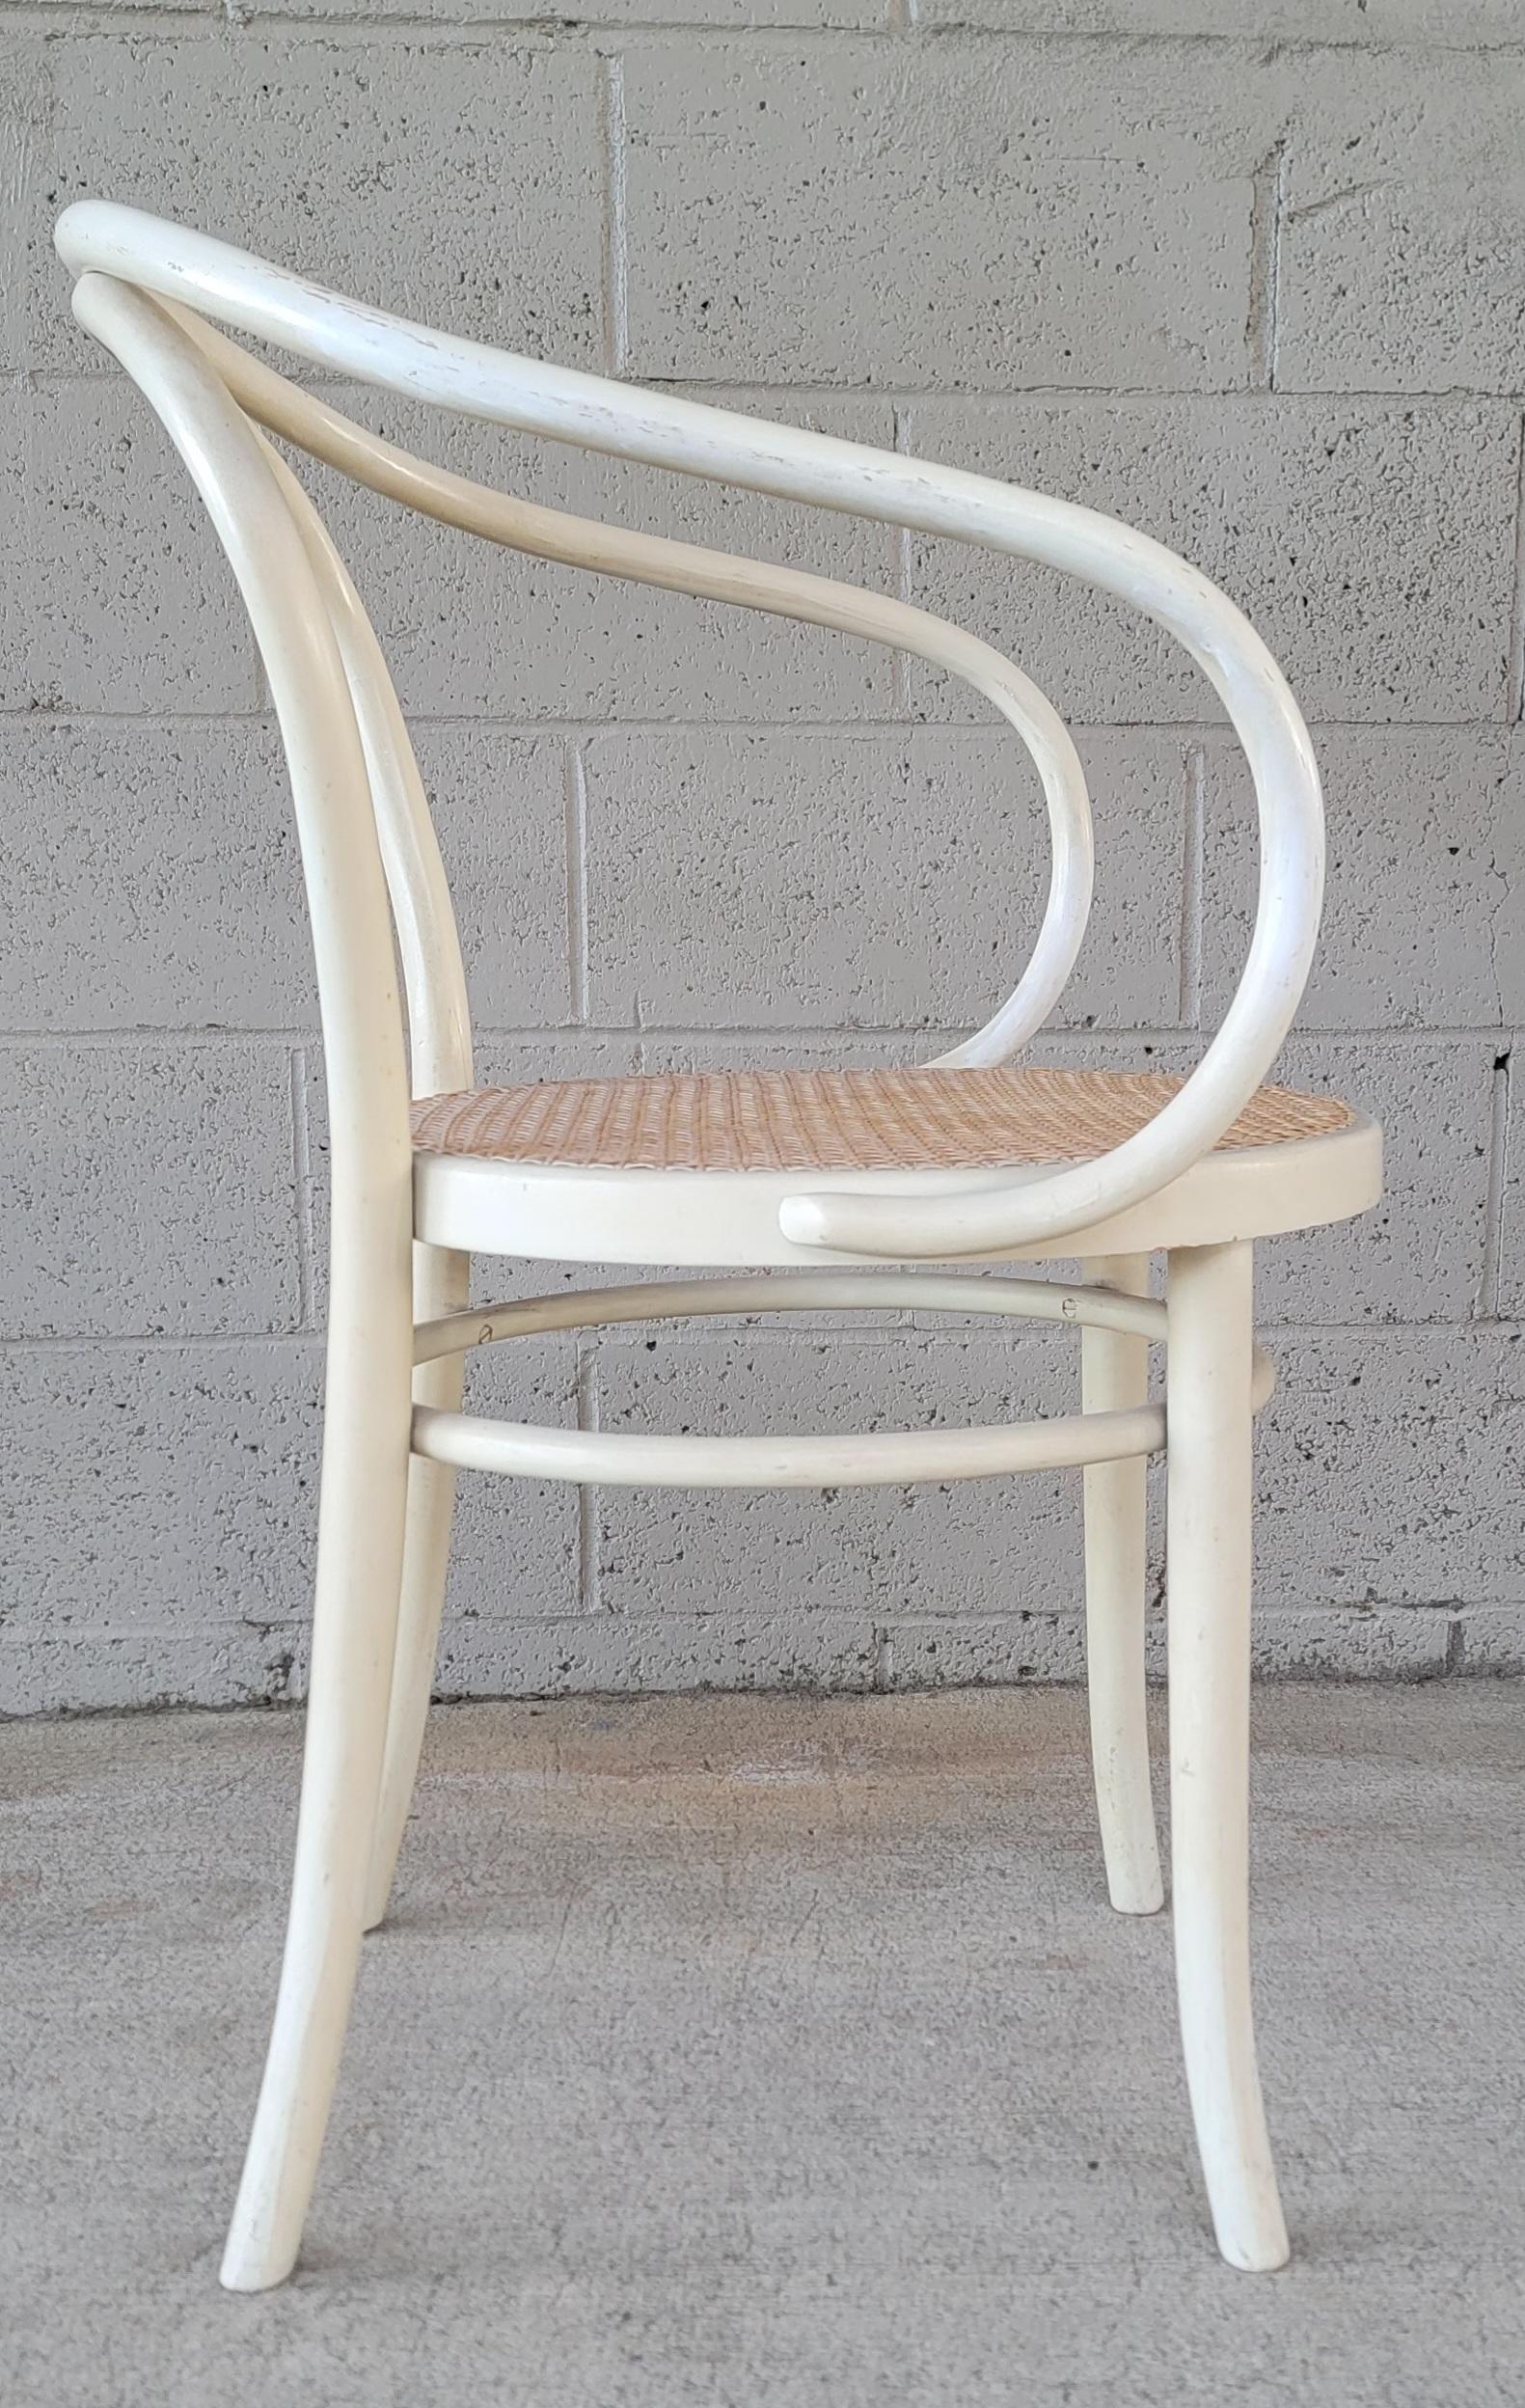 Bentwood armchair with cane seat and painted white finish. Attributed to Wiener Stuhl for Thonet. Graceful, sculptural design. Structurally solid. Light wear to finish from age and use.